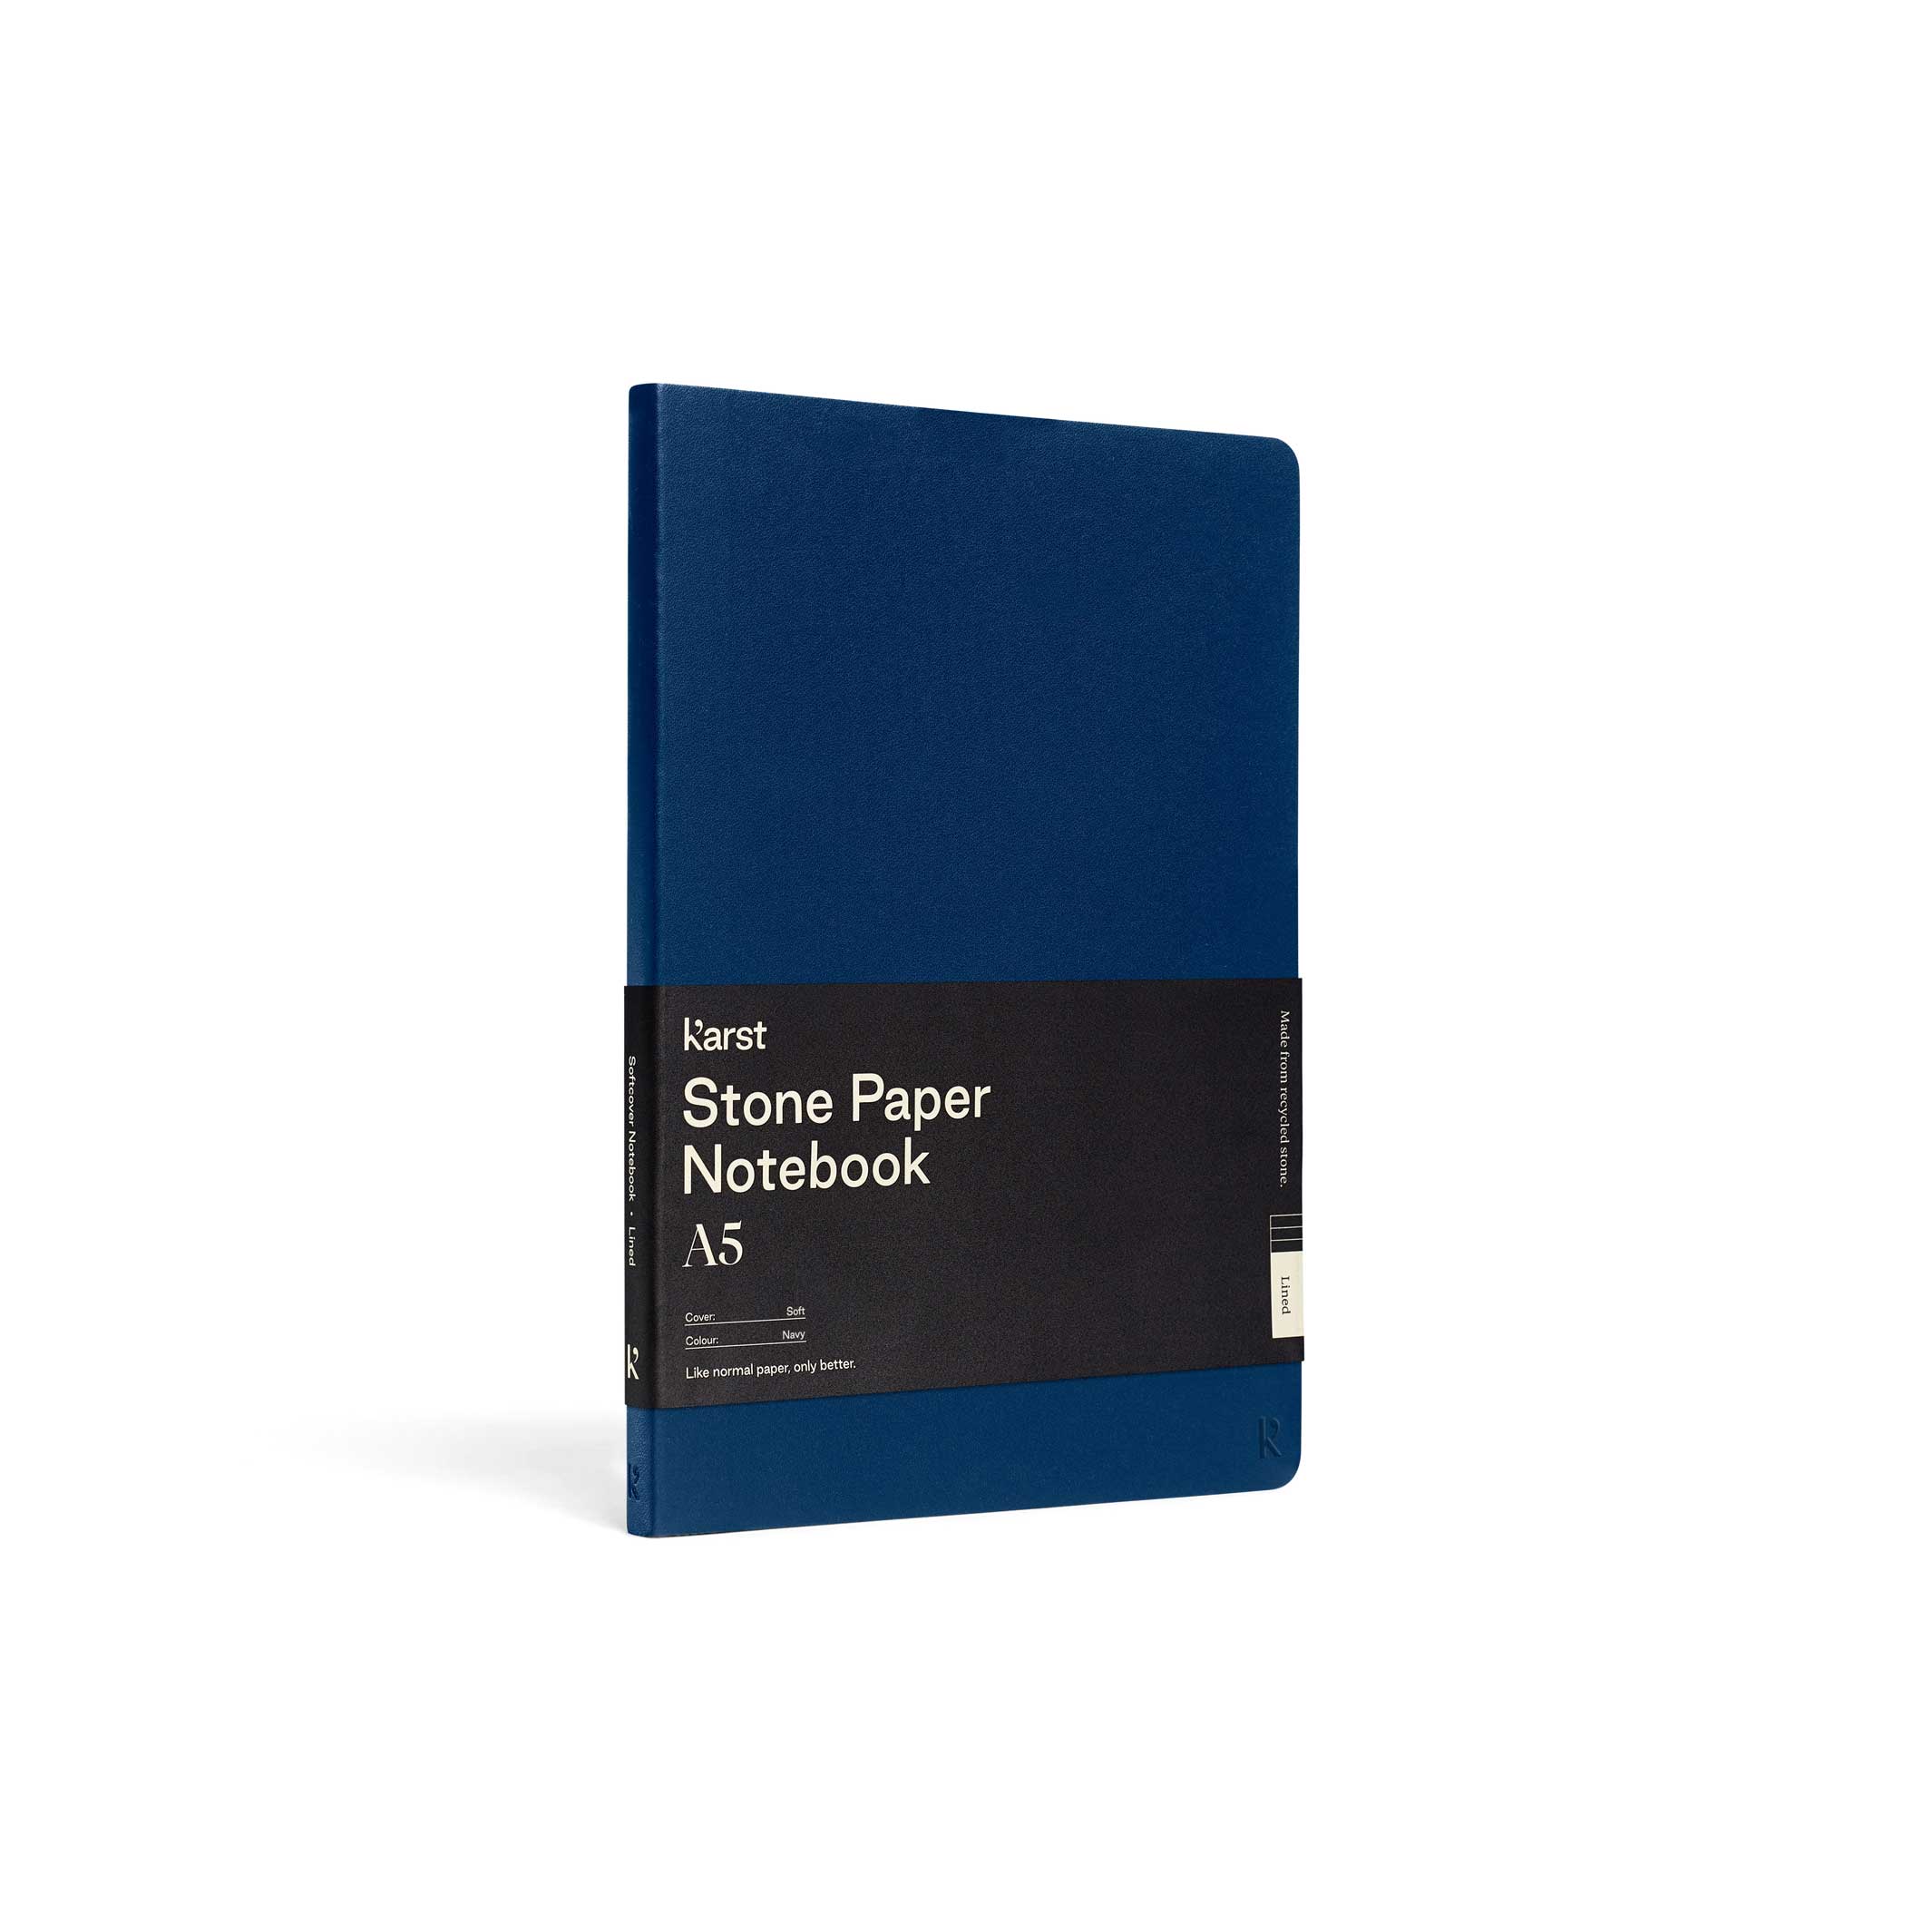 Softcover NOTEBOOK A5 | Navy-blaues NOTIZBUCH | Karst Stone Paper